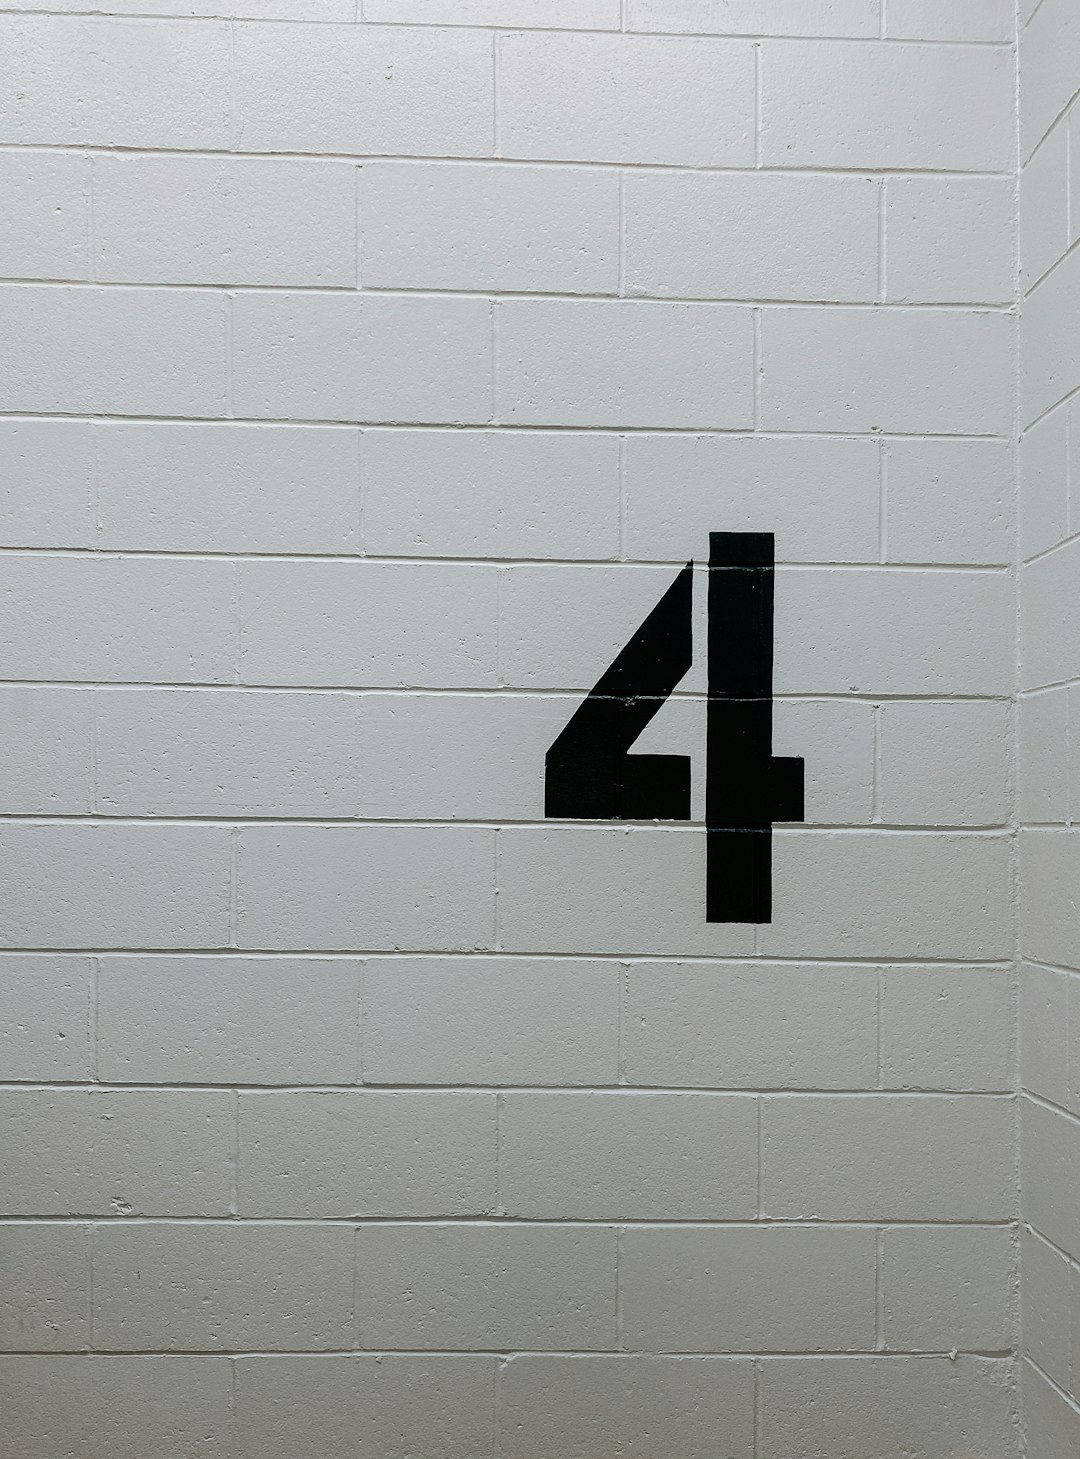 Number 4 in a building’s stairwell